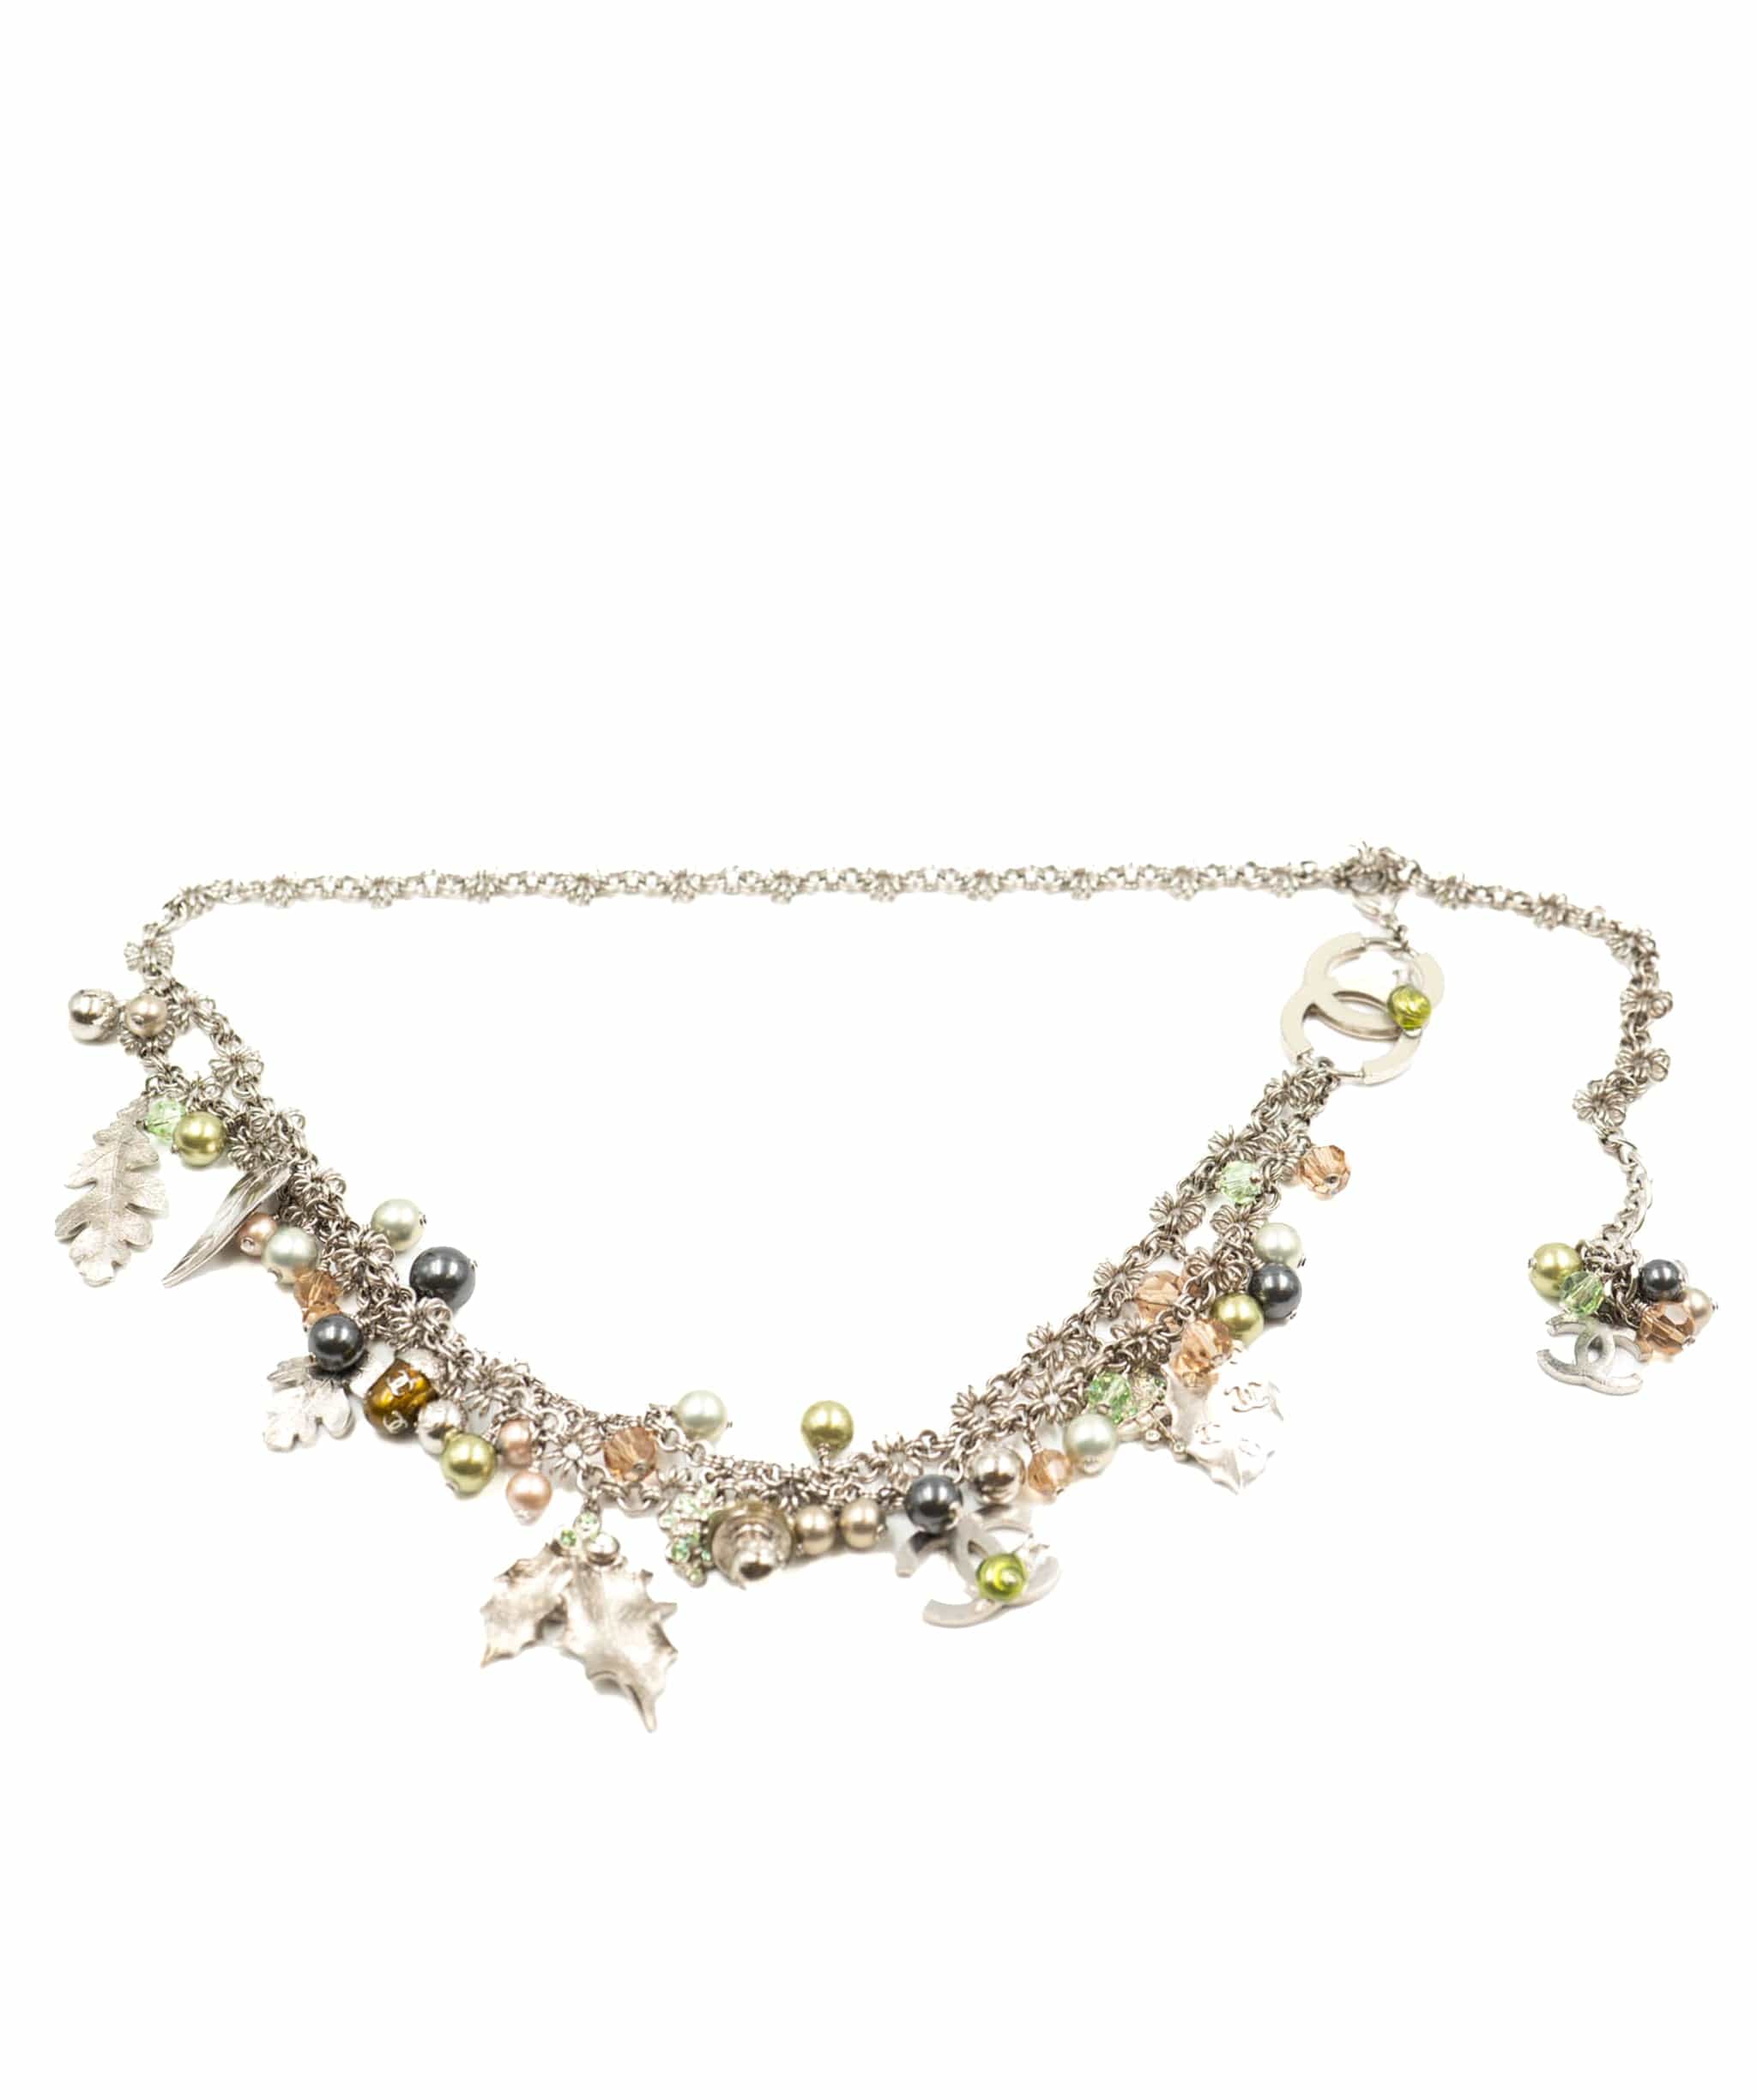 LuxuryPromise Chanel Silver Double Belt Chain with Acorns and Beads - AWL3686